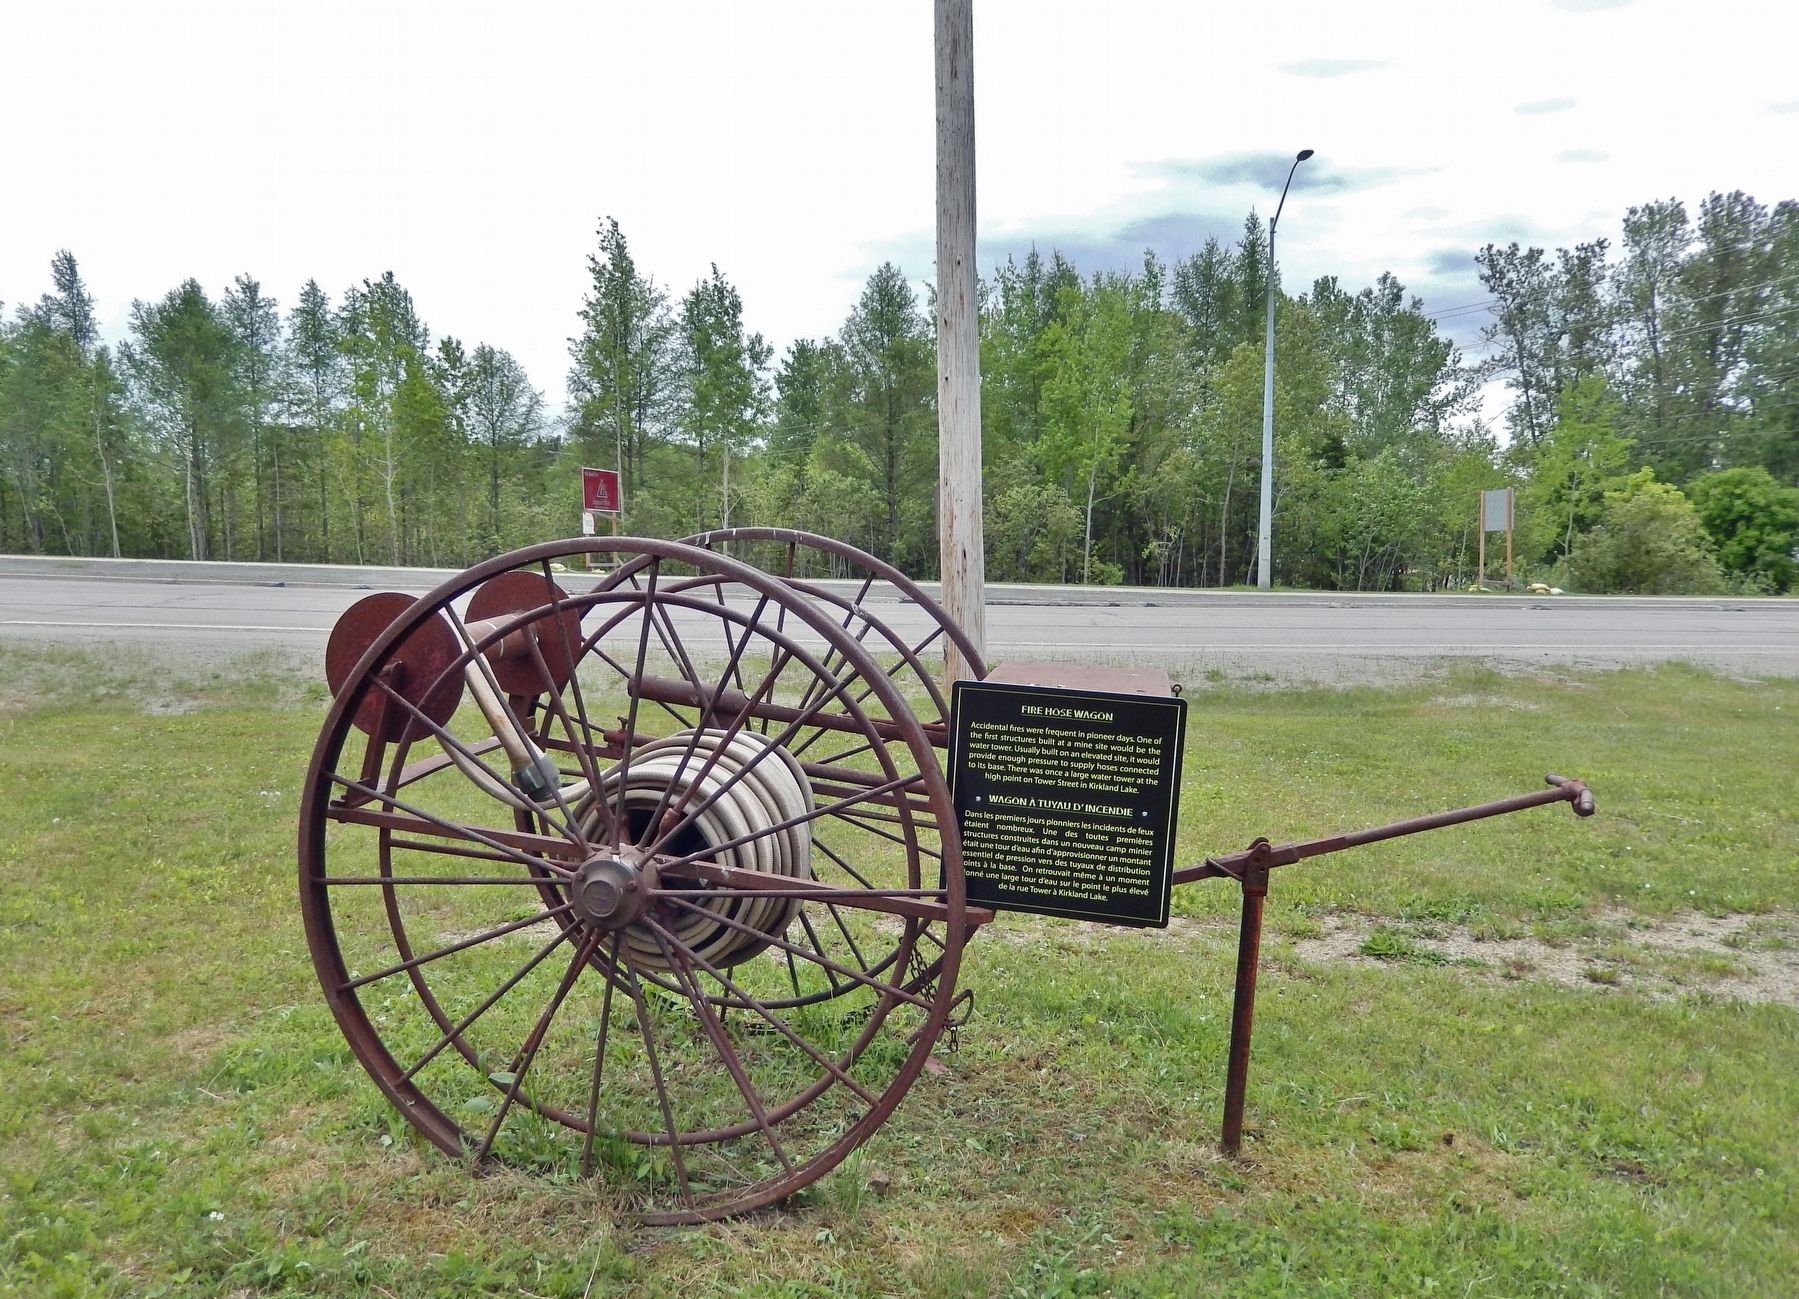 Fire Hose Wagon / Wagon  tuyau d'incendie image. Click for full size.